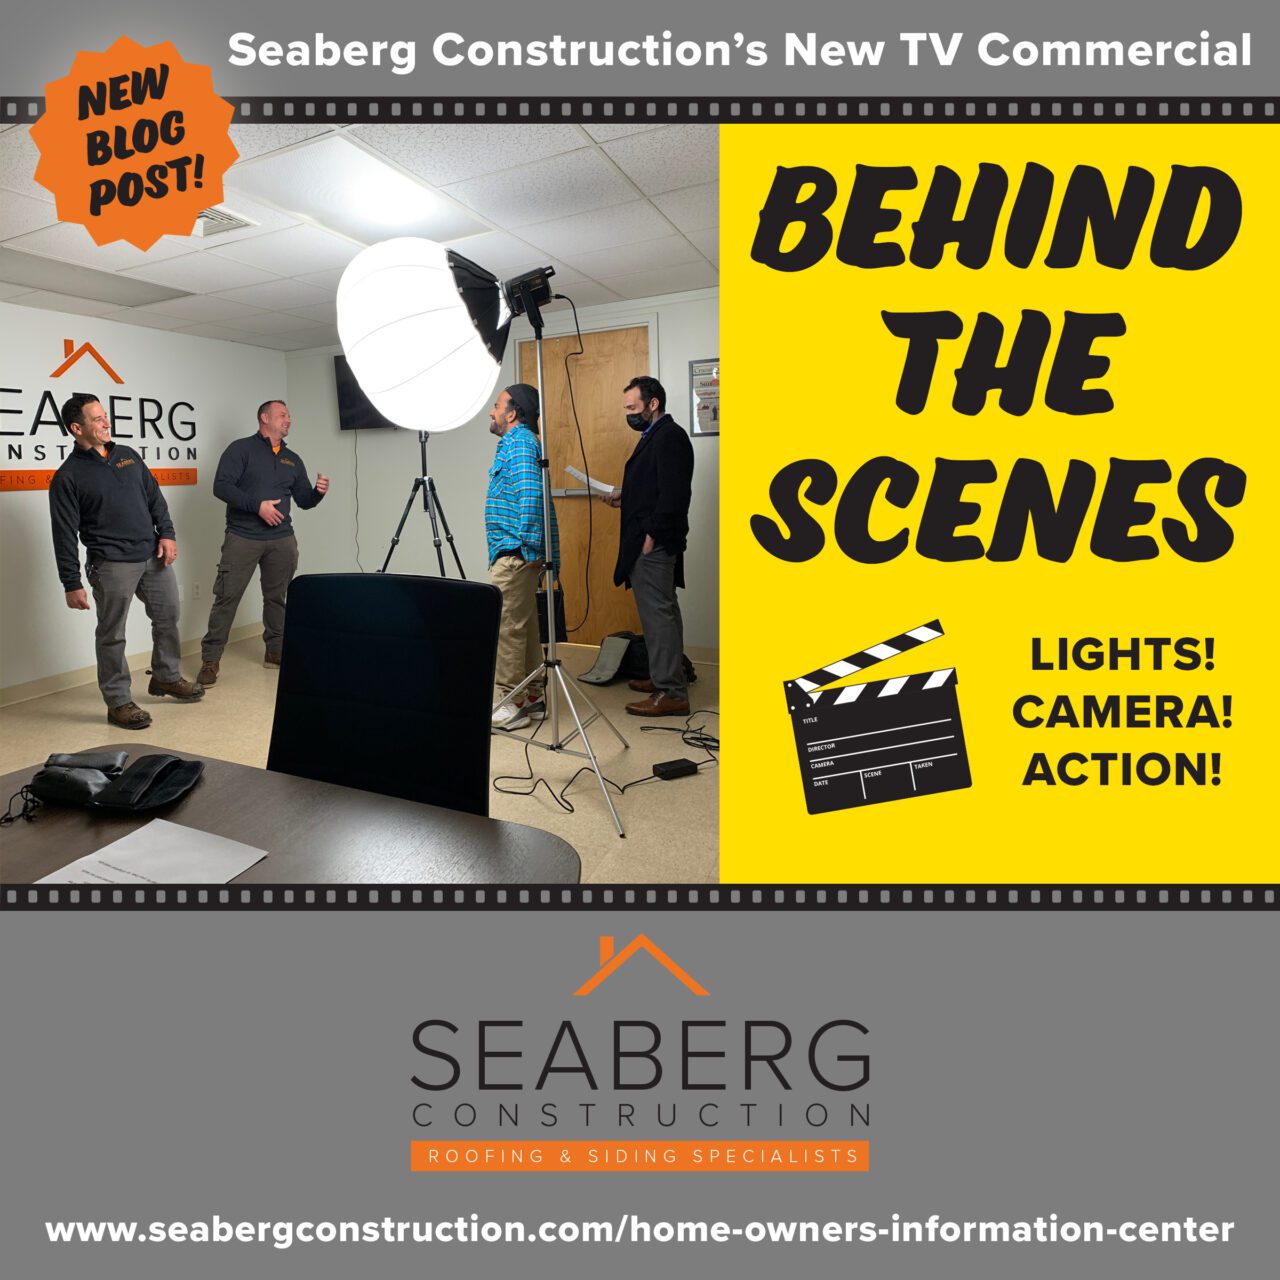 Seaberg Construction Blog: Seaberg Construction TV Commercial Behind the Scenes